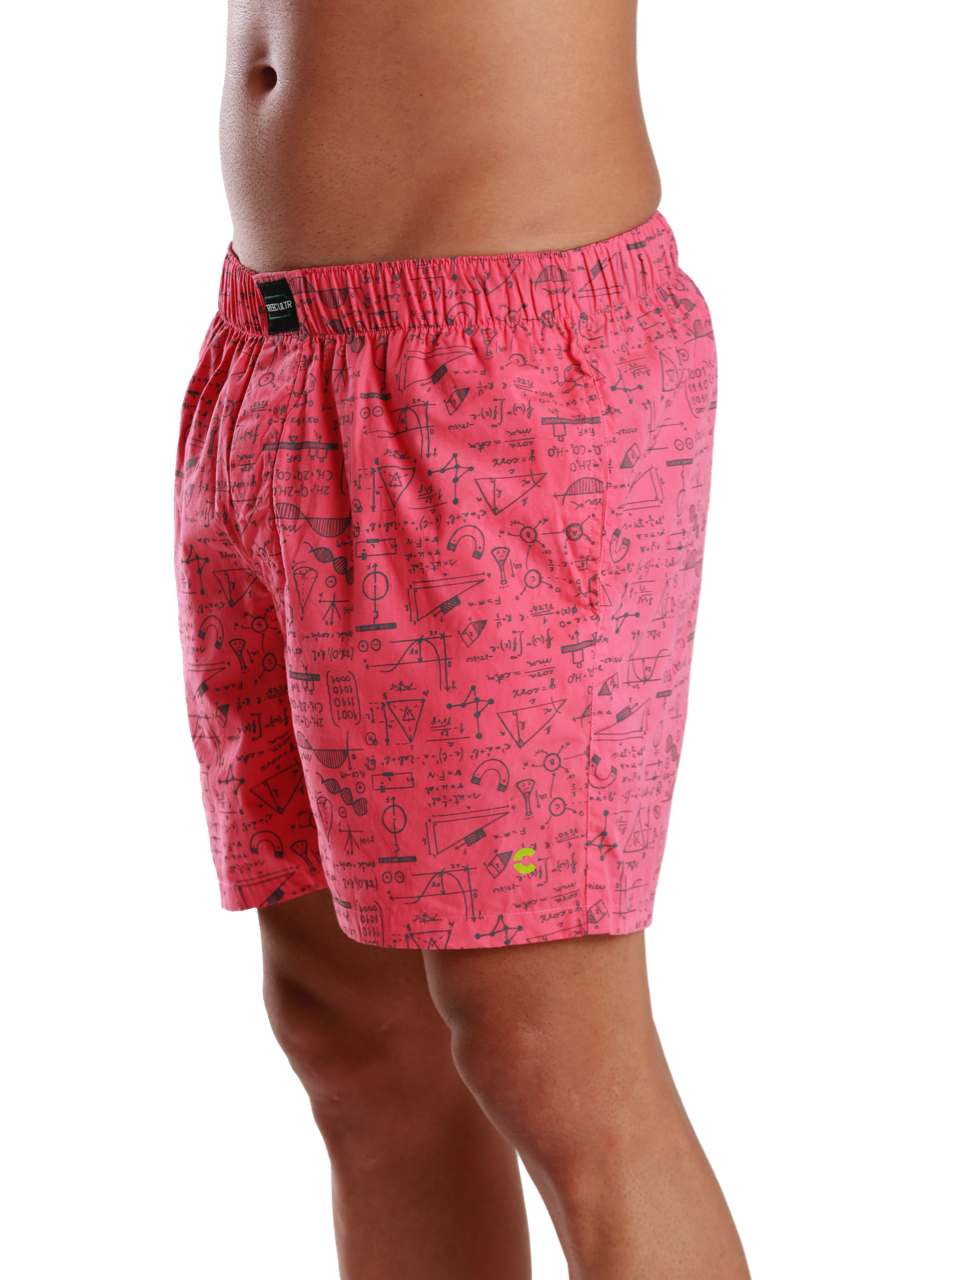 Men's All-Day Boxer Shorts Plain & Printed - (Pack of 3)